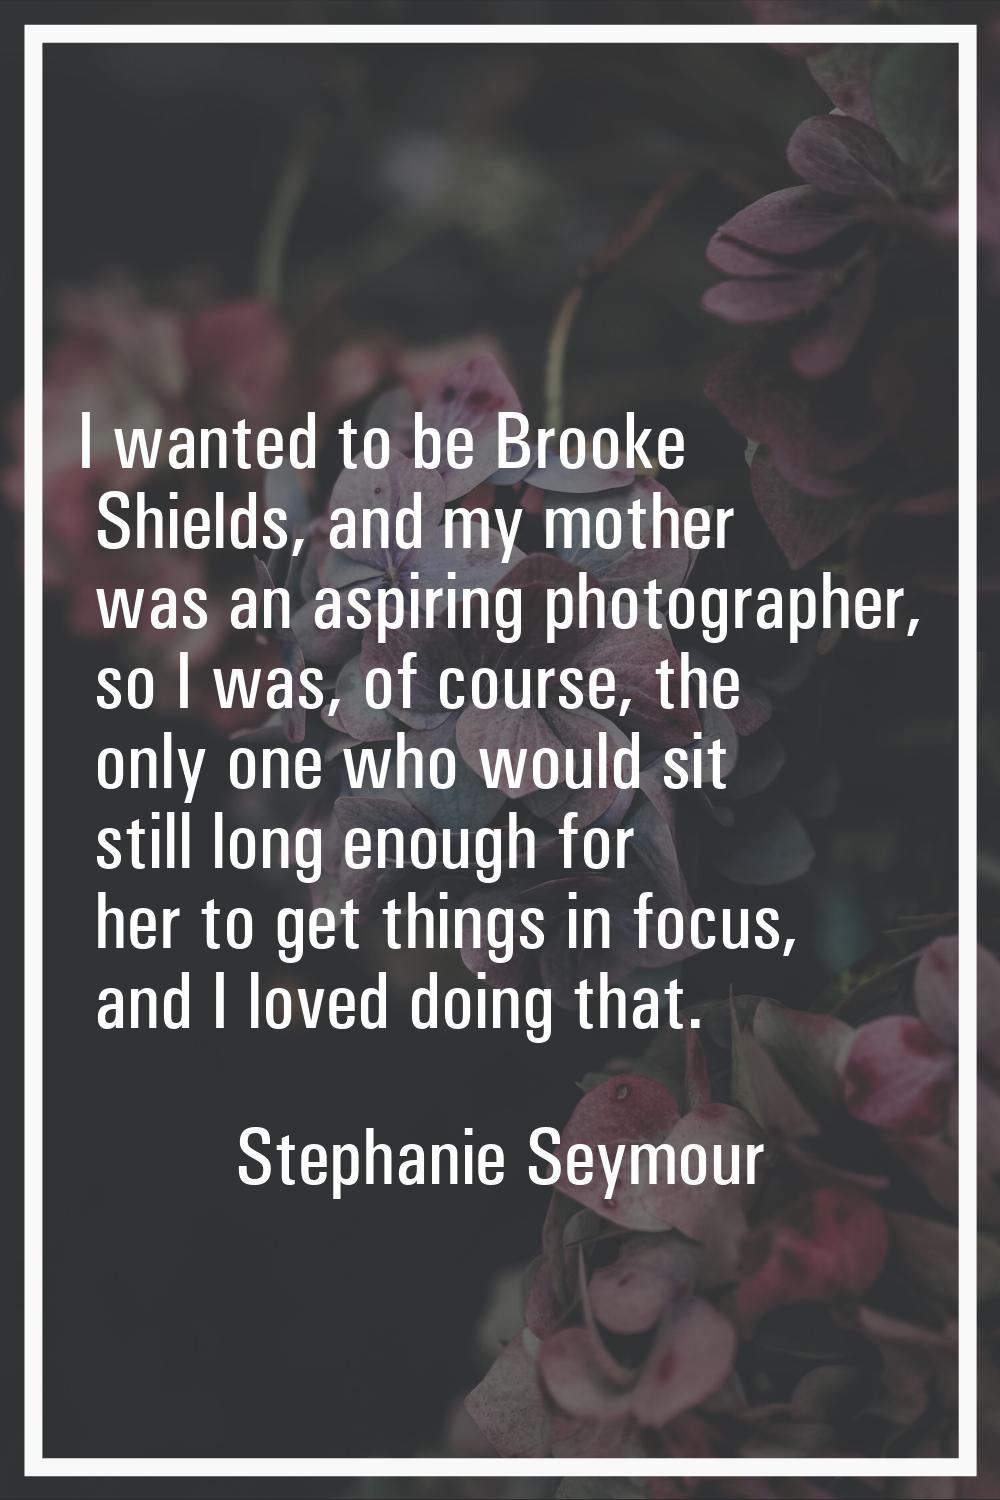 I wanted to be Brooke Shields, and my mother was an aspiring photographer, so I was, of course, the